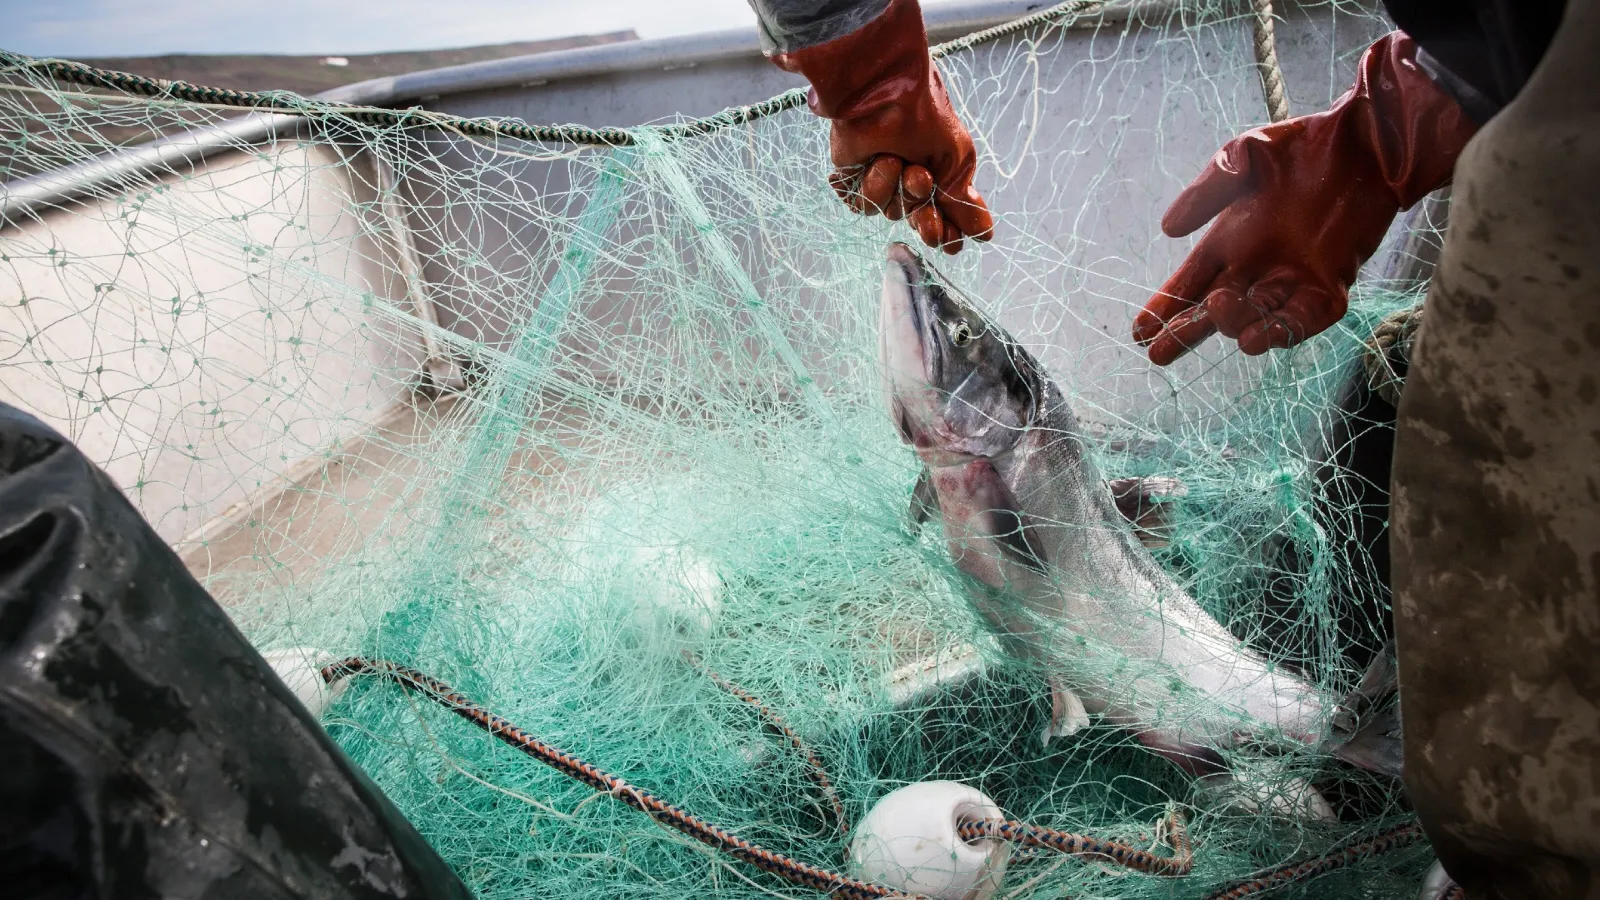 As salmon disappear, the battle over fishing rights in Alaska intensifies